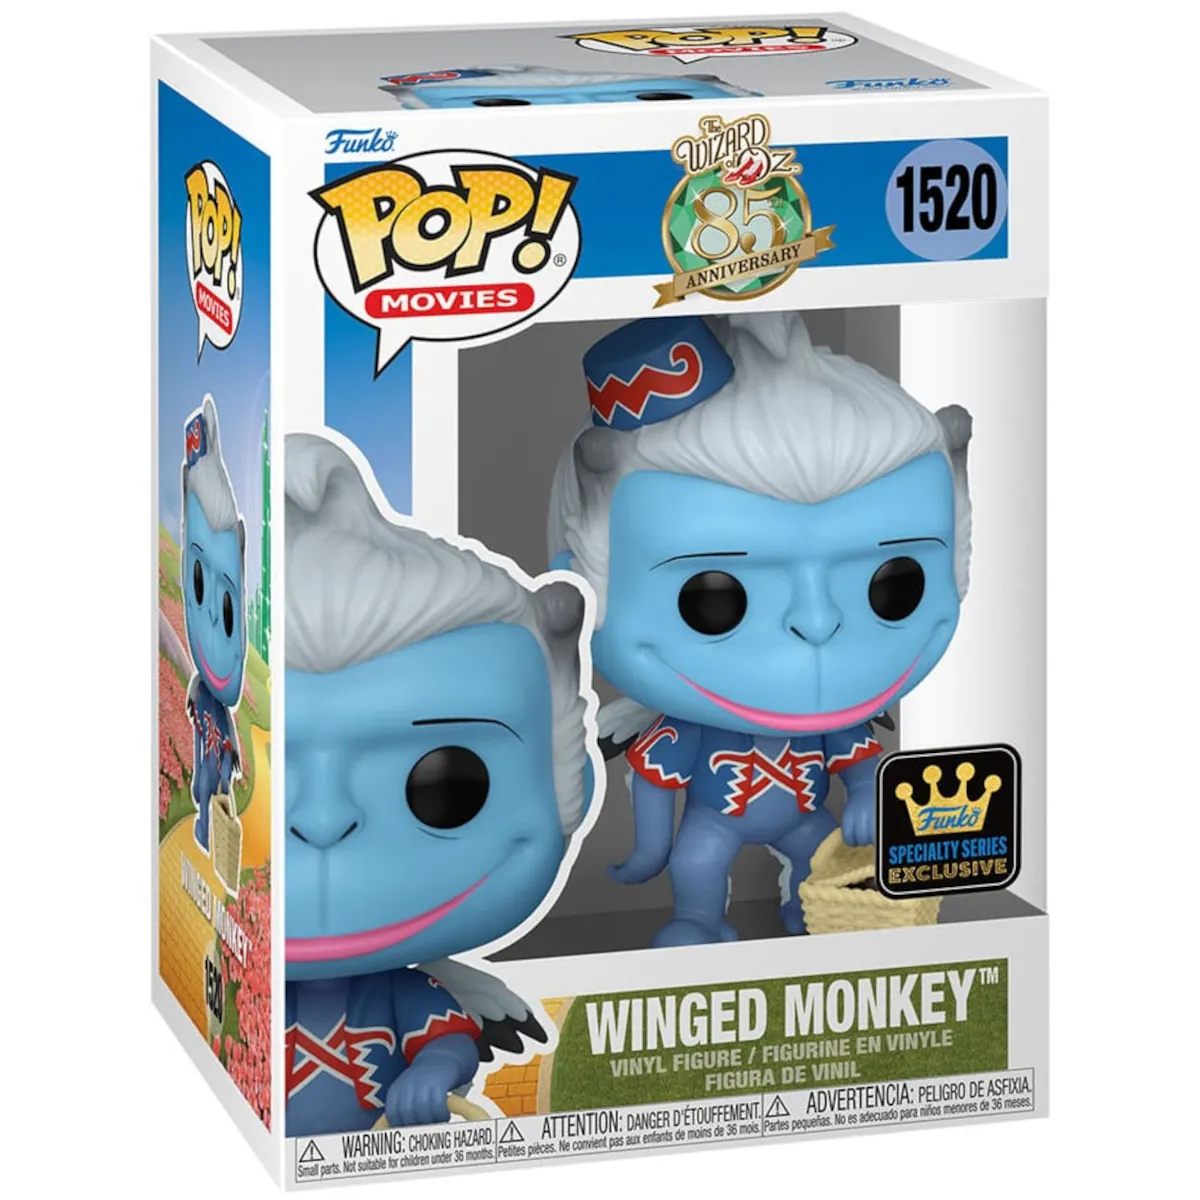 Funko Pop! Movies - The Wizard of Oz (85th Anniversary) - Wicked